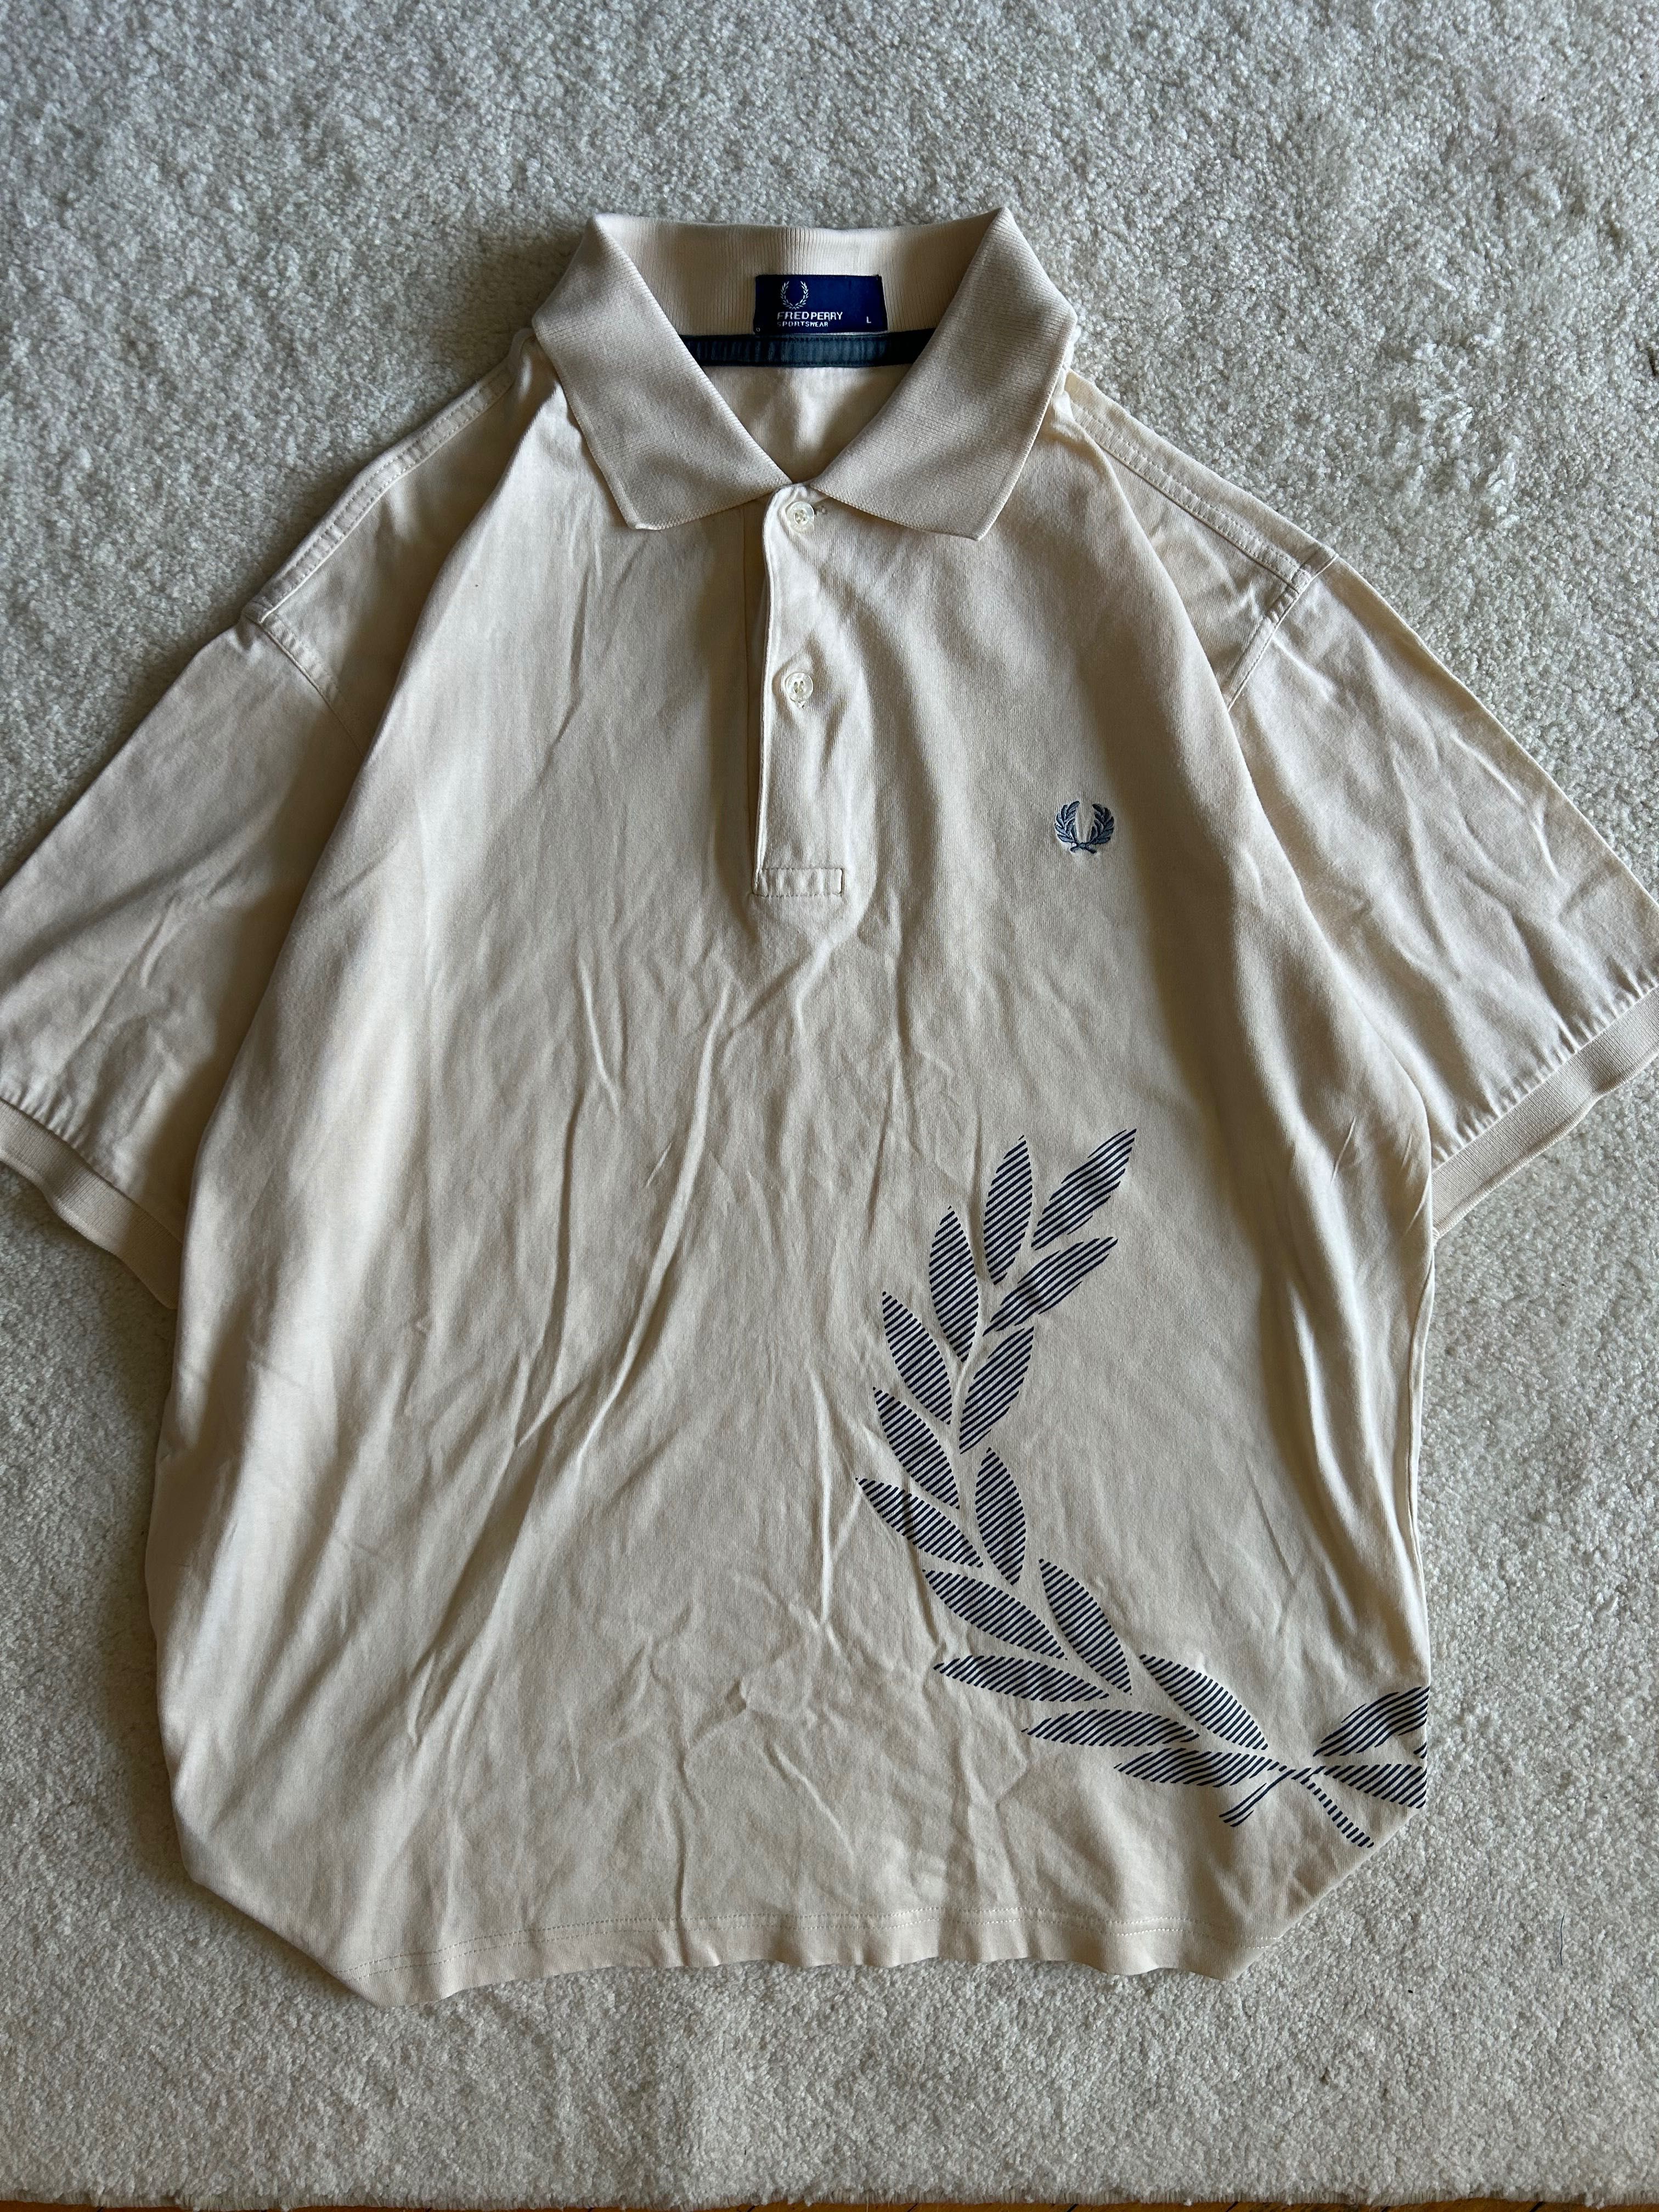 Polo Fred Perry size L